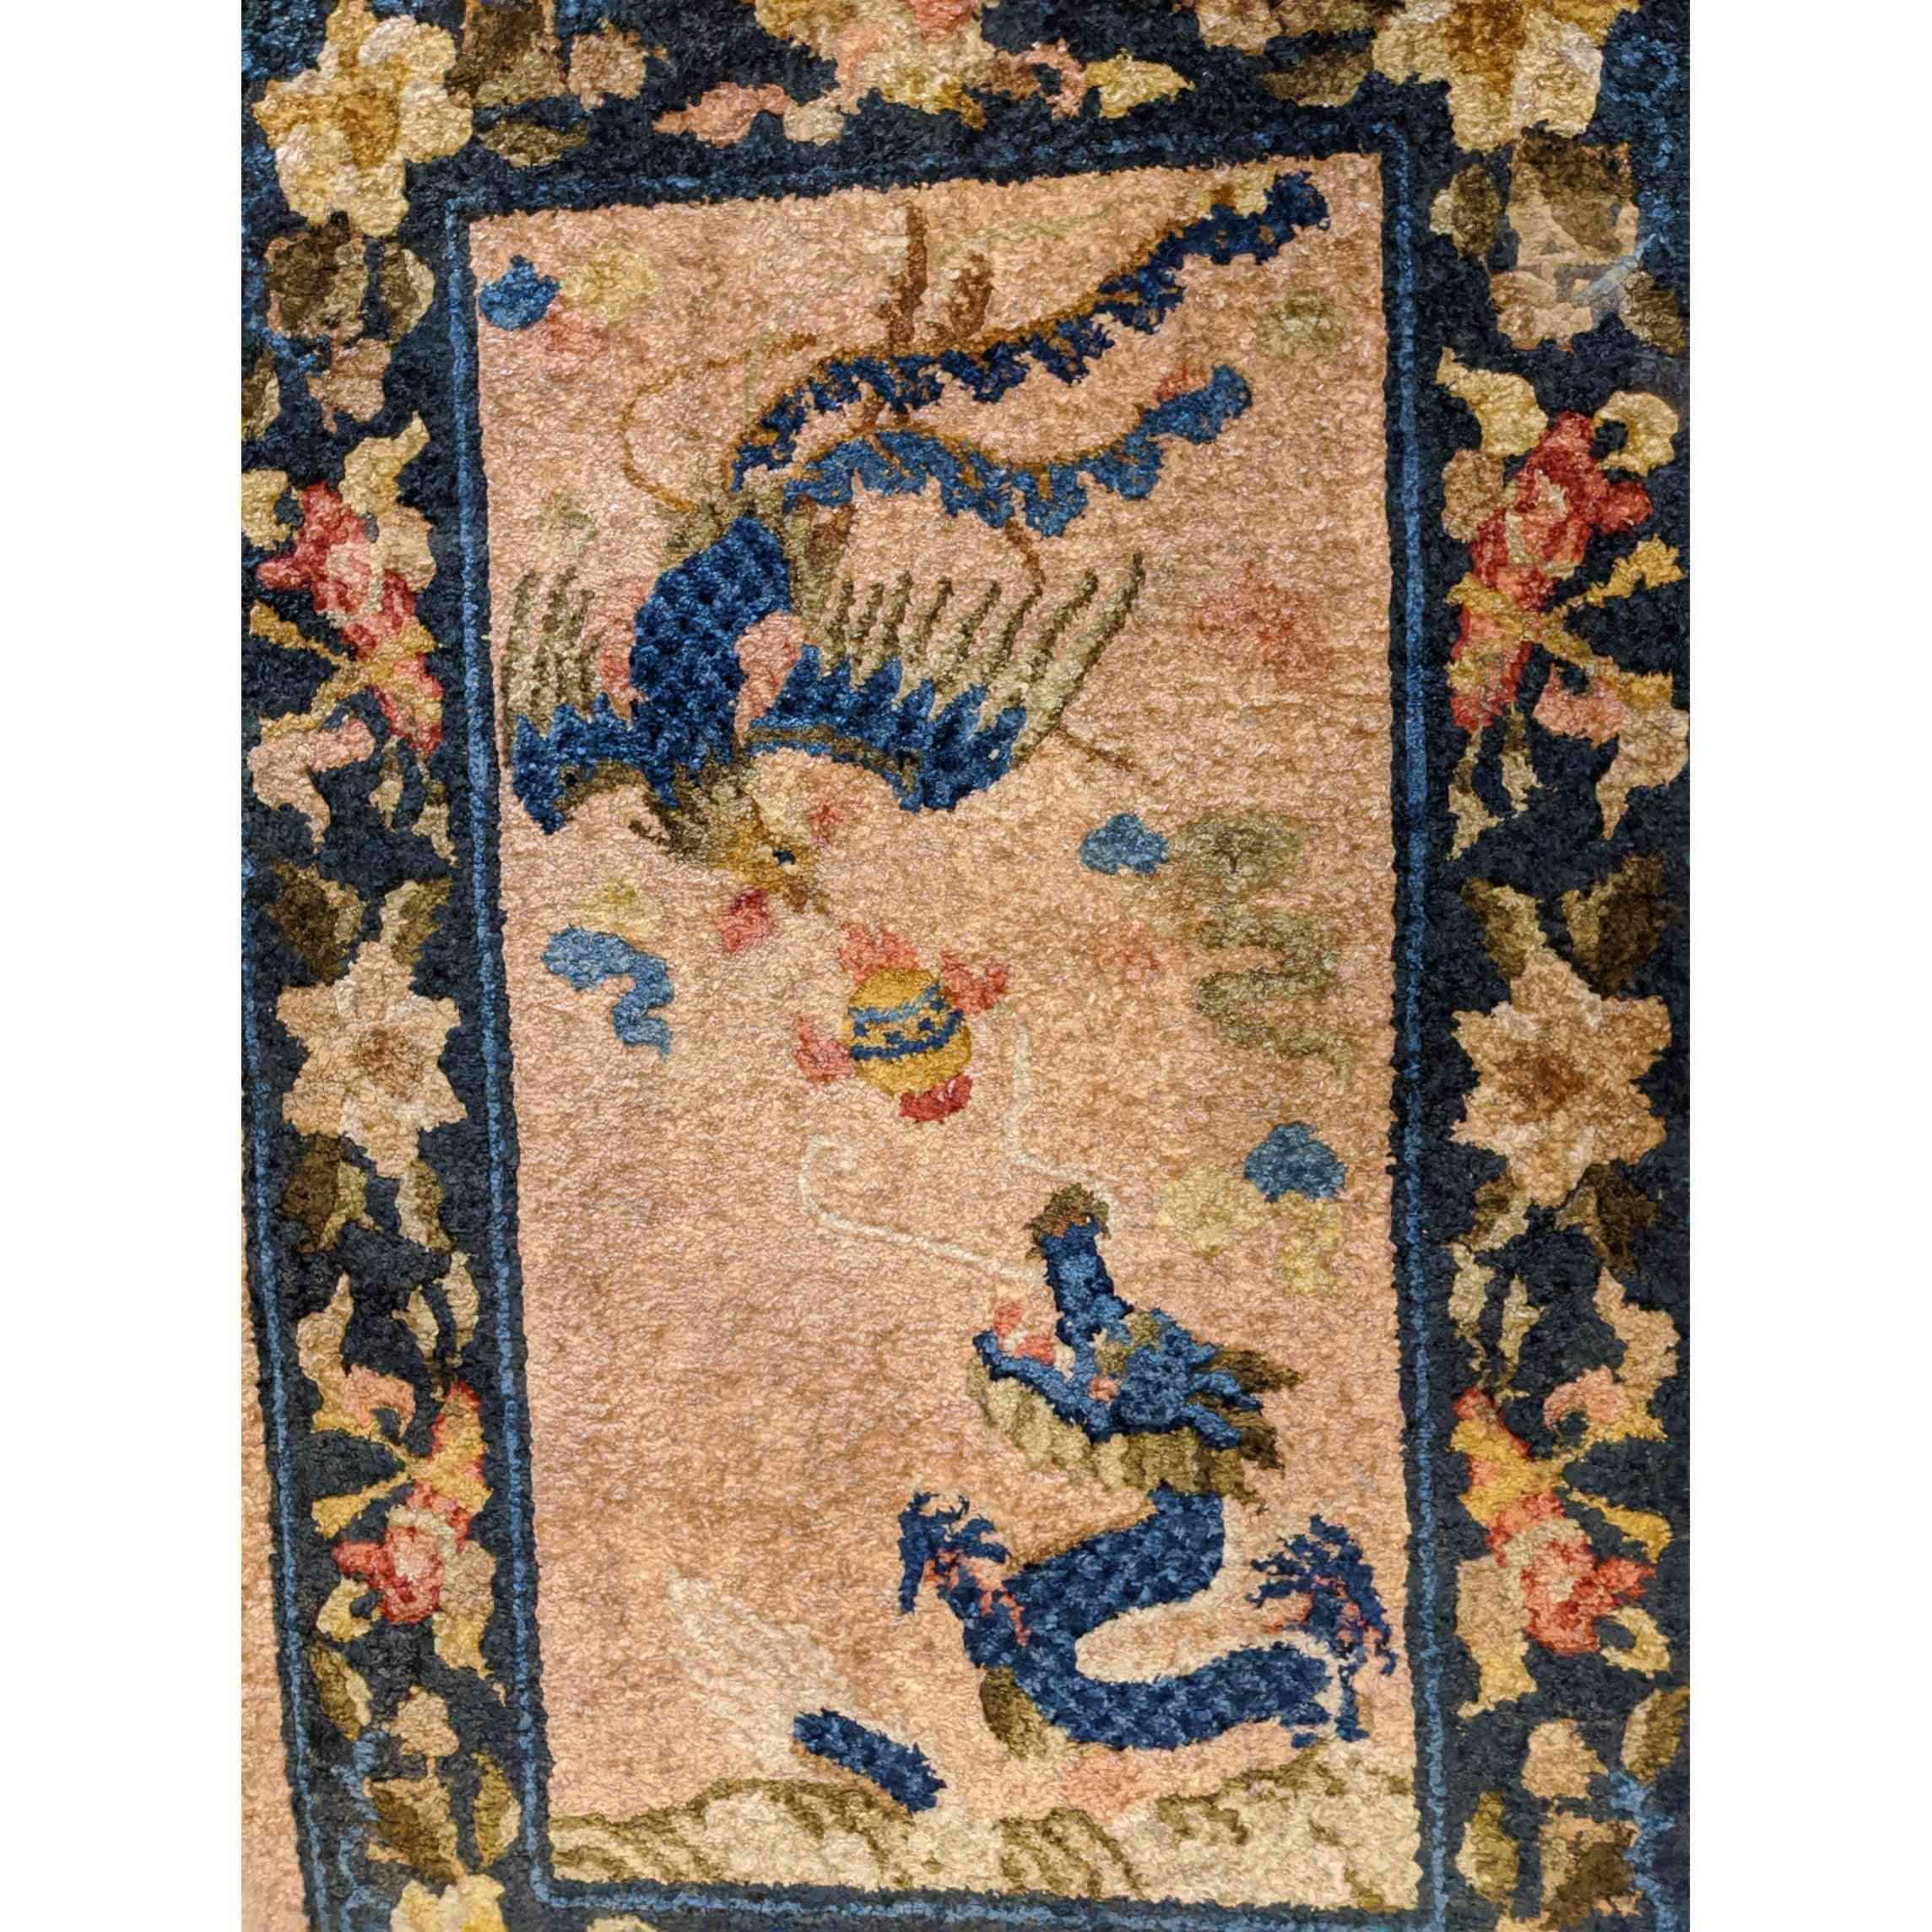 93 x 64 cm Chinese Traditional Blue Small Rug - Rugmaster